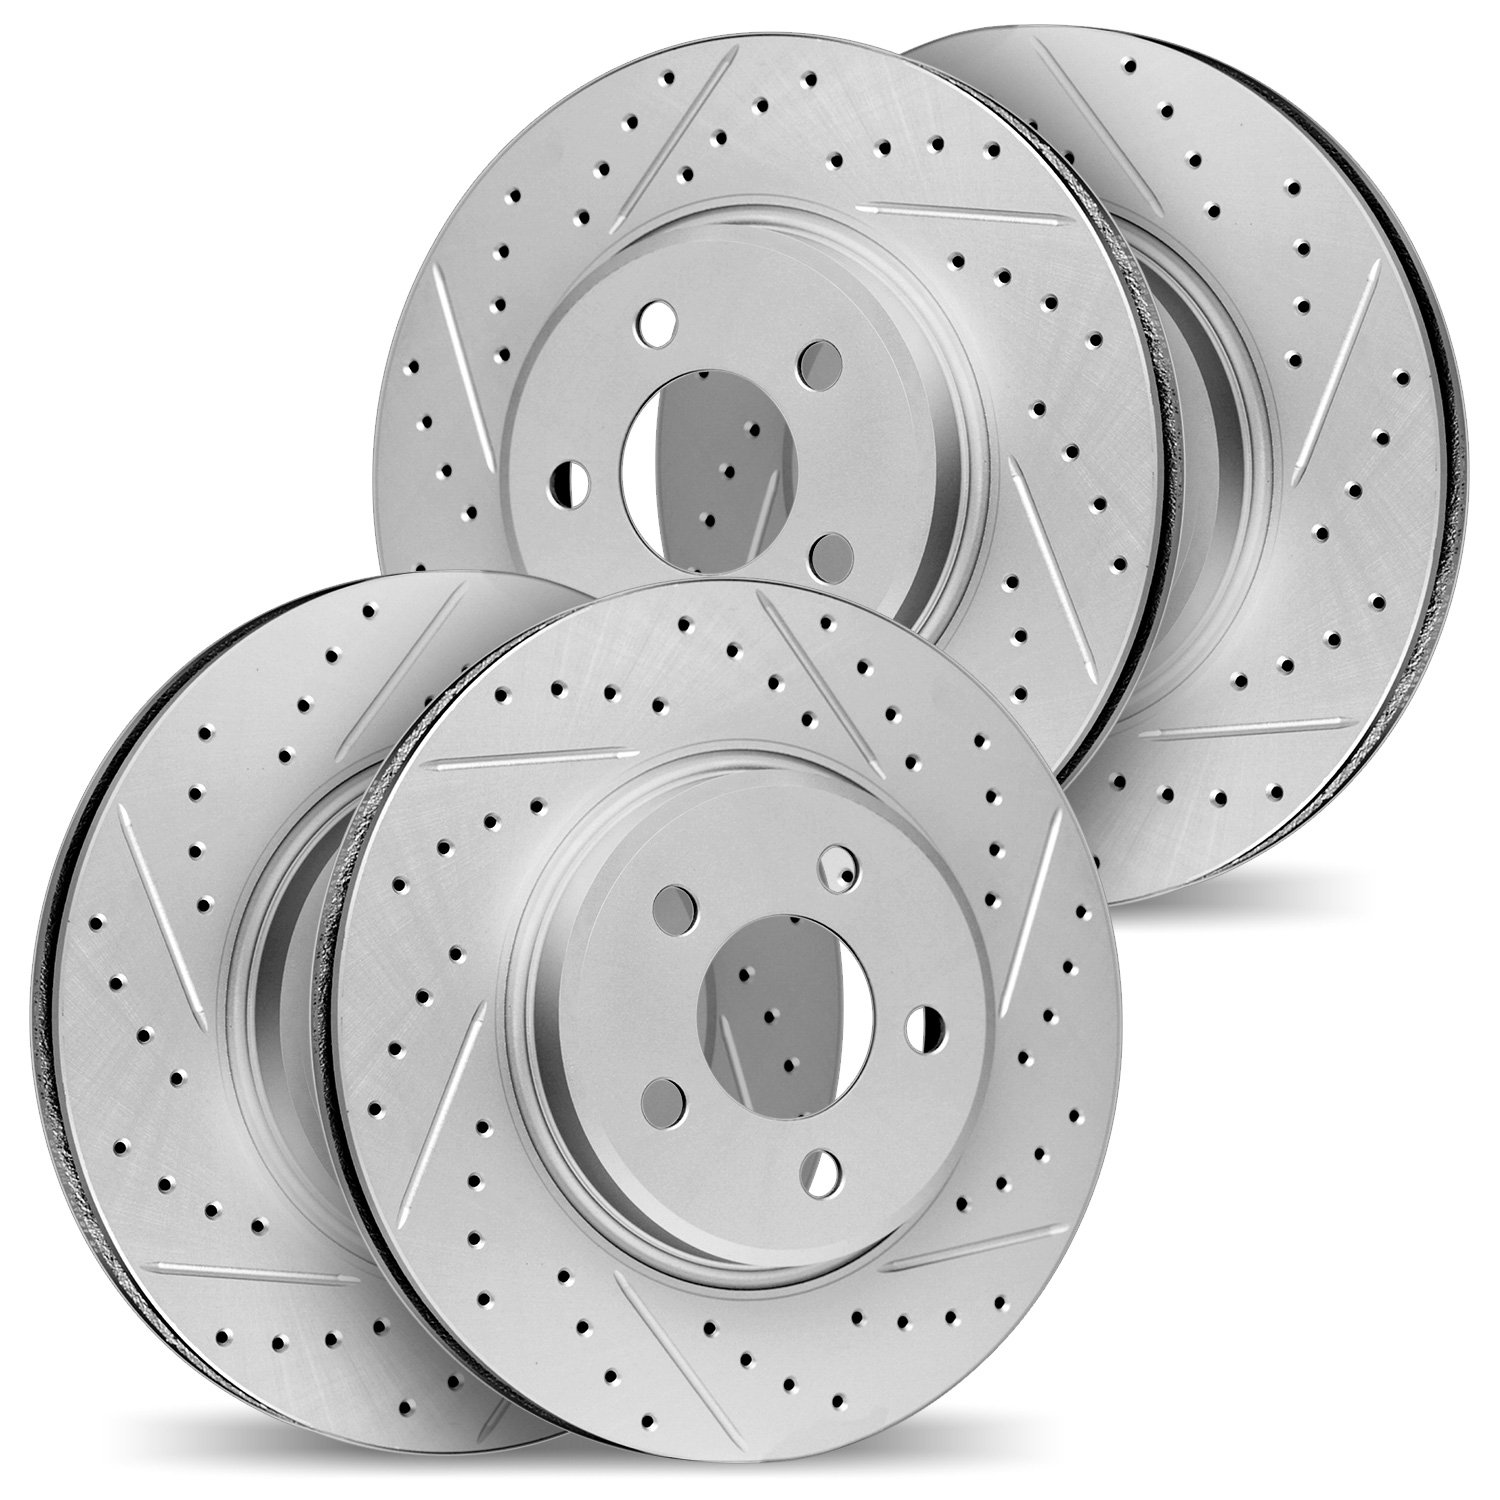 2004-31041 Geoperformance Drilled/Slotted Brake Rotors, Fits Select BMW, Position: Front and Rear